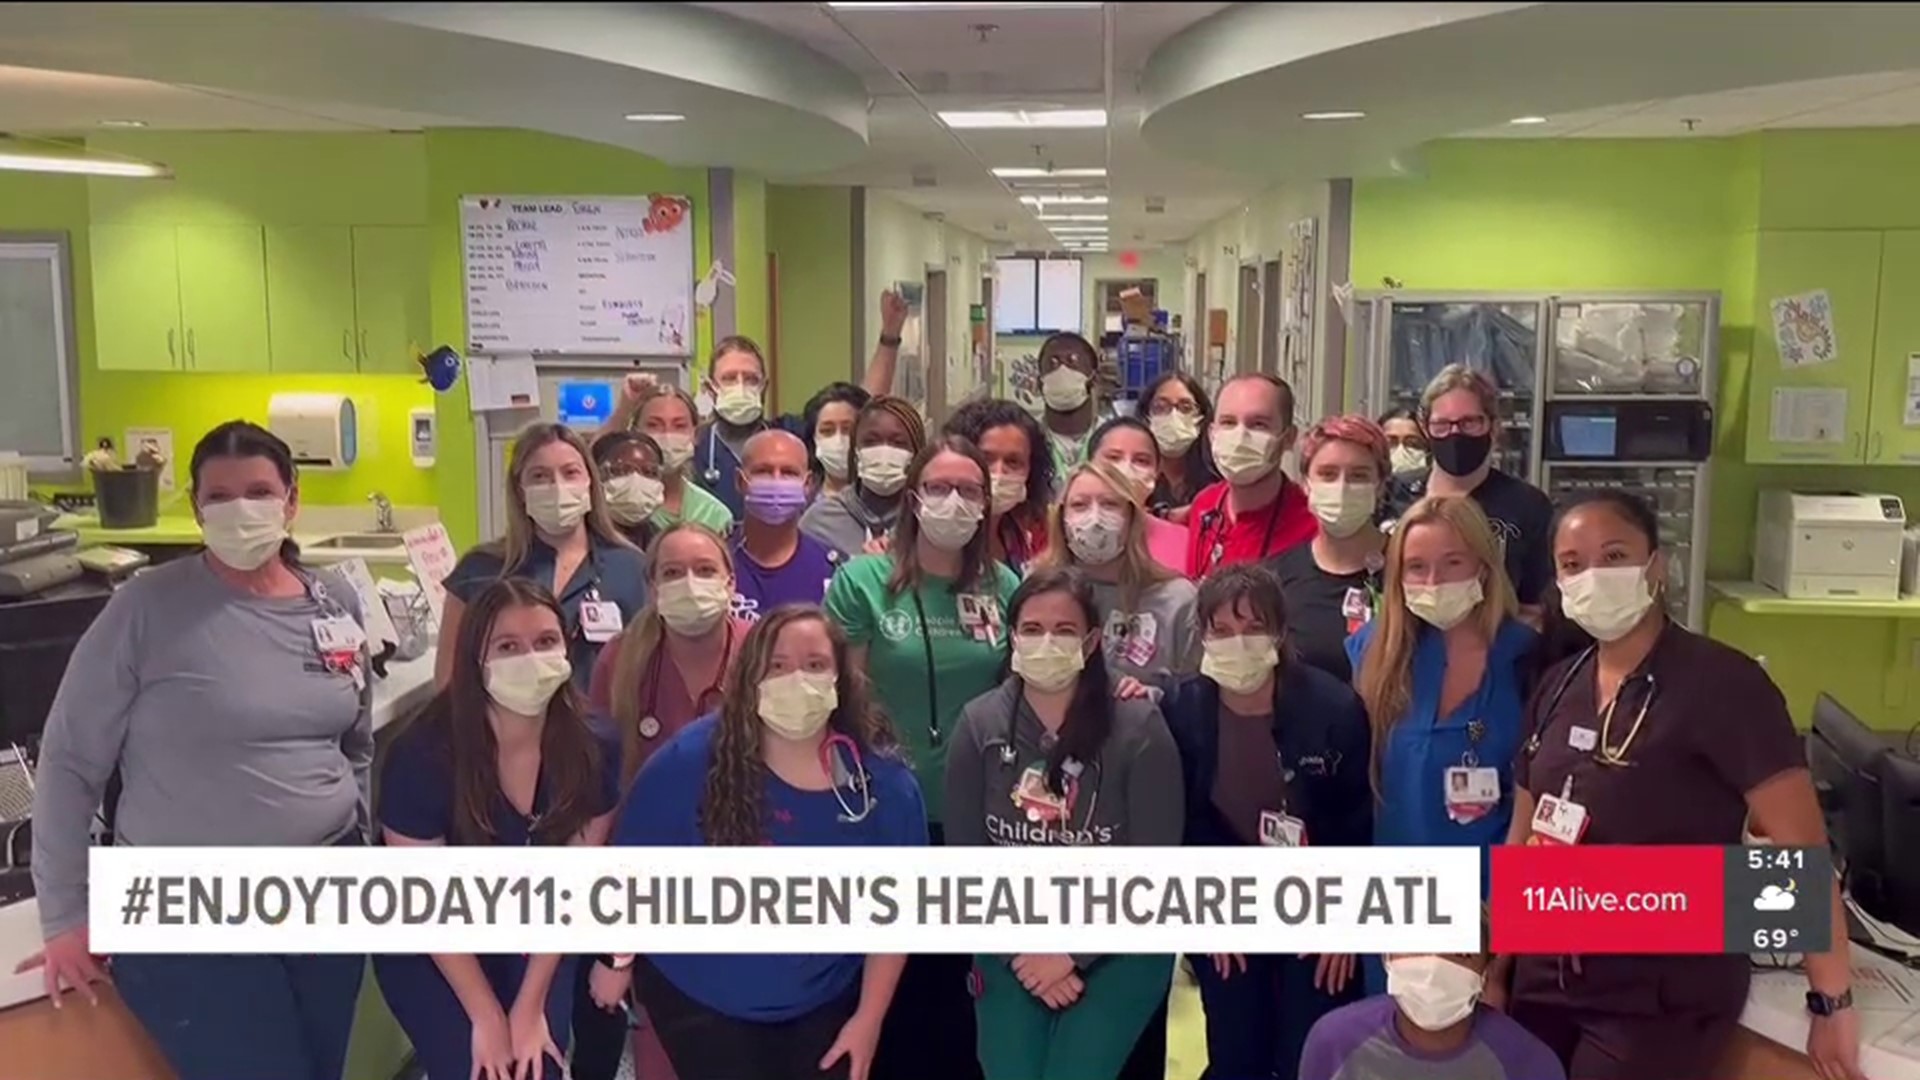 If your organization would like to submit an 'Enjoy Today' video, you can email the video here: whereatlspeaks@11alive.com